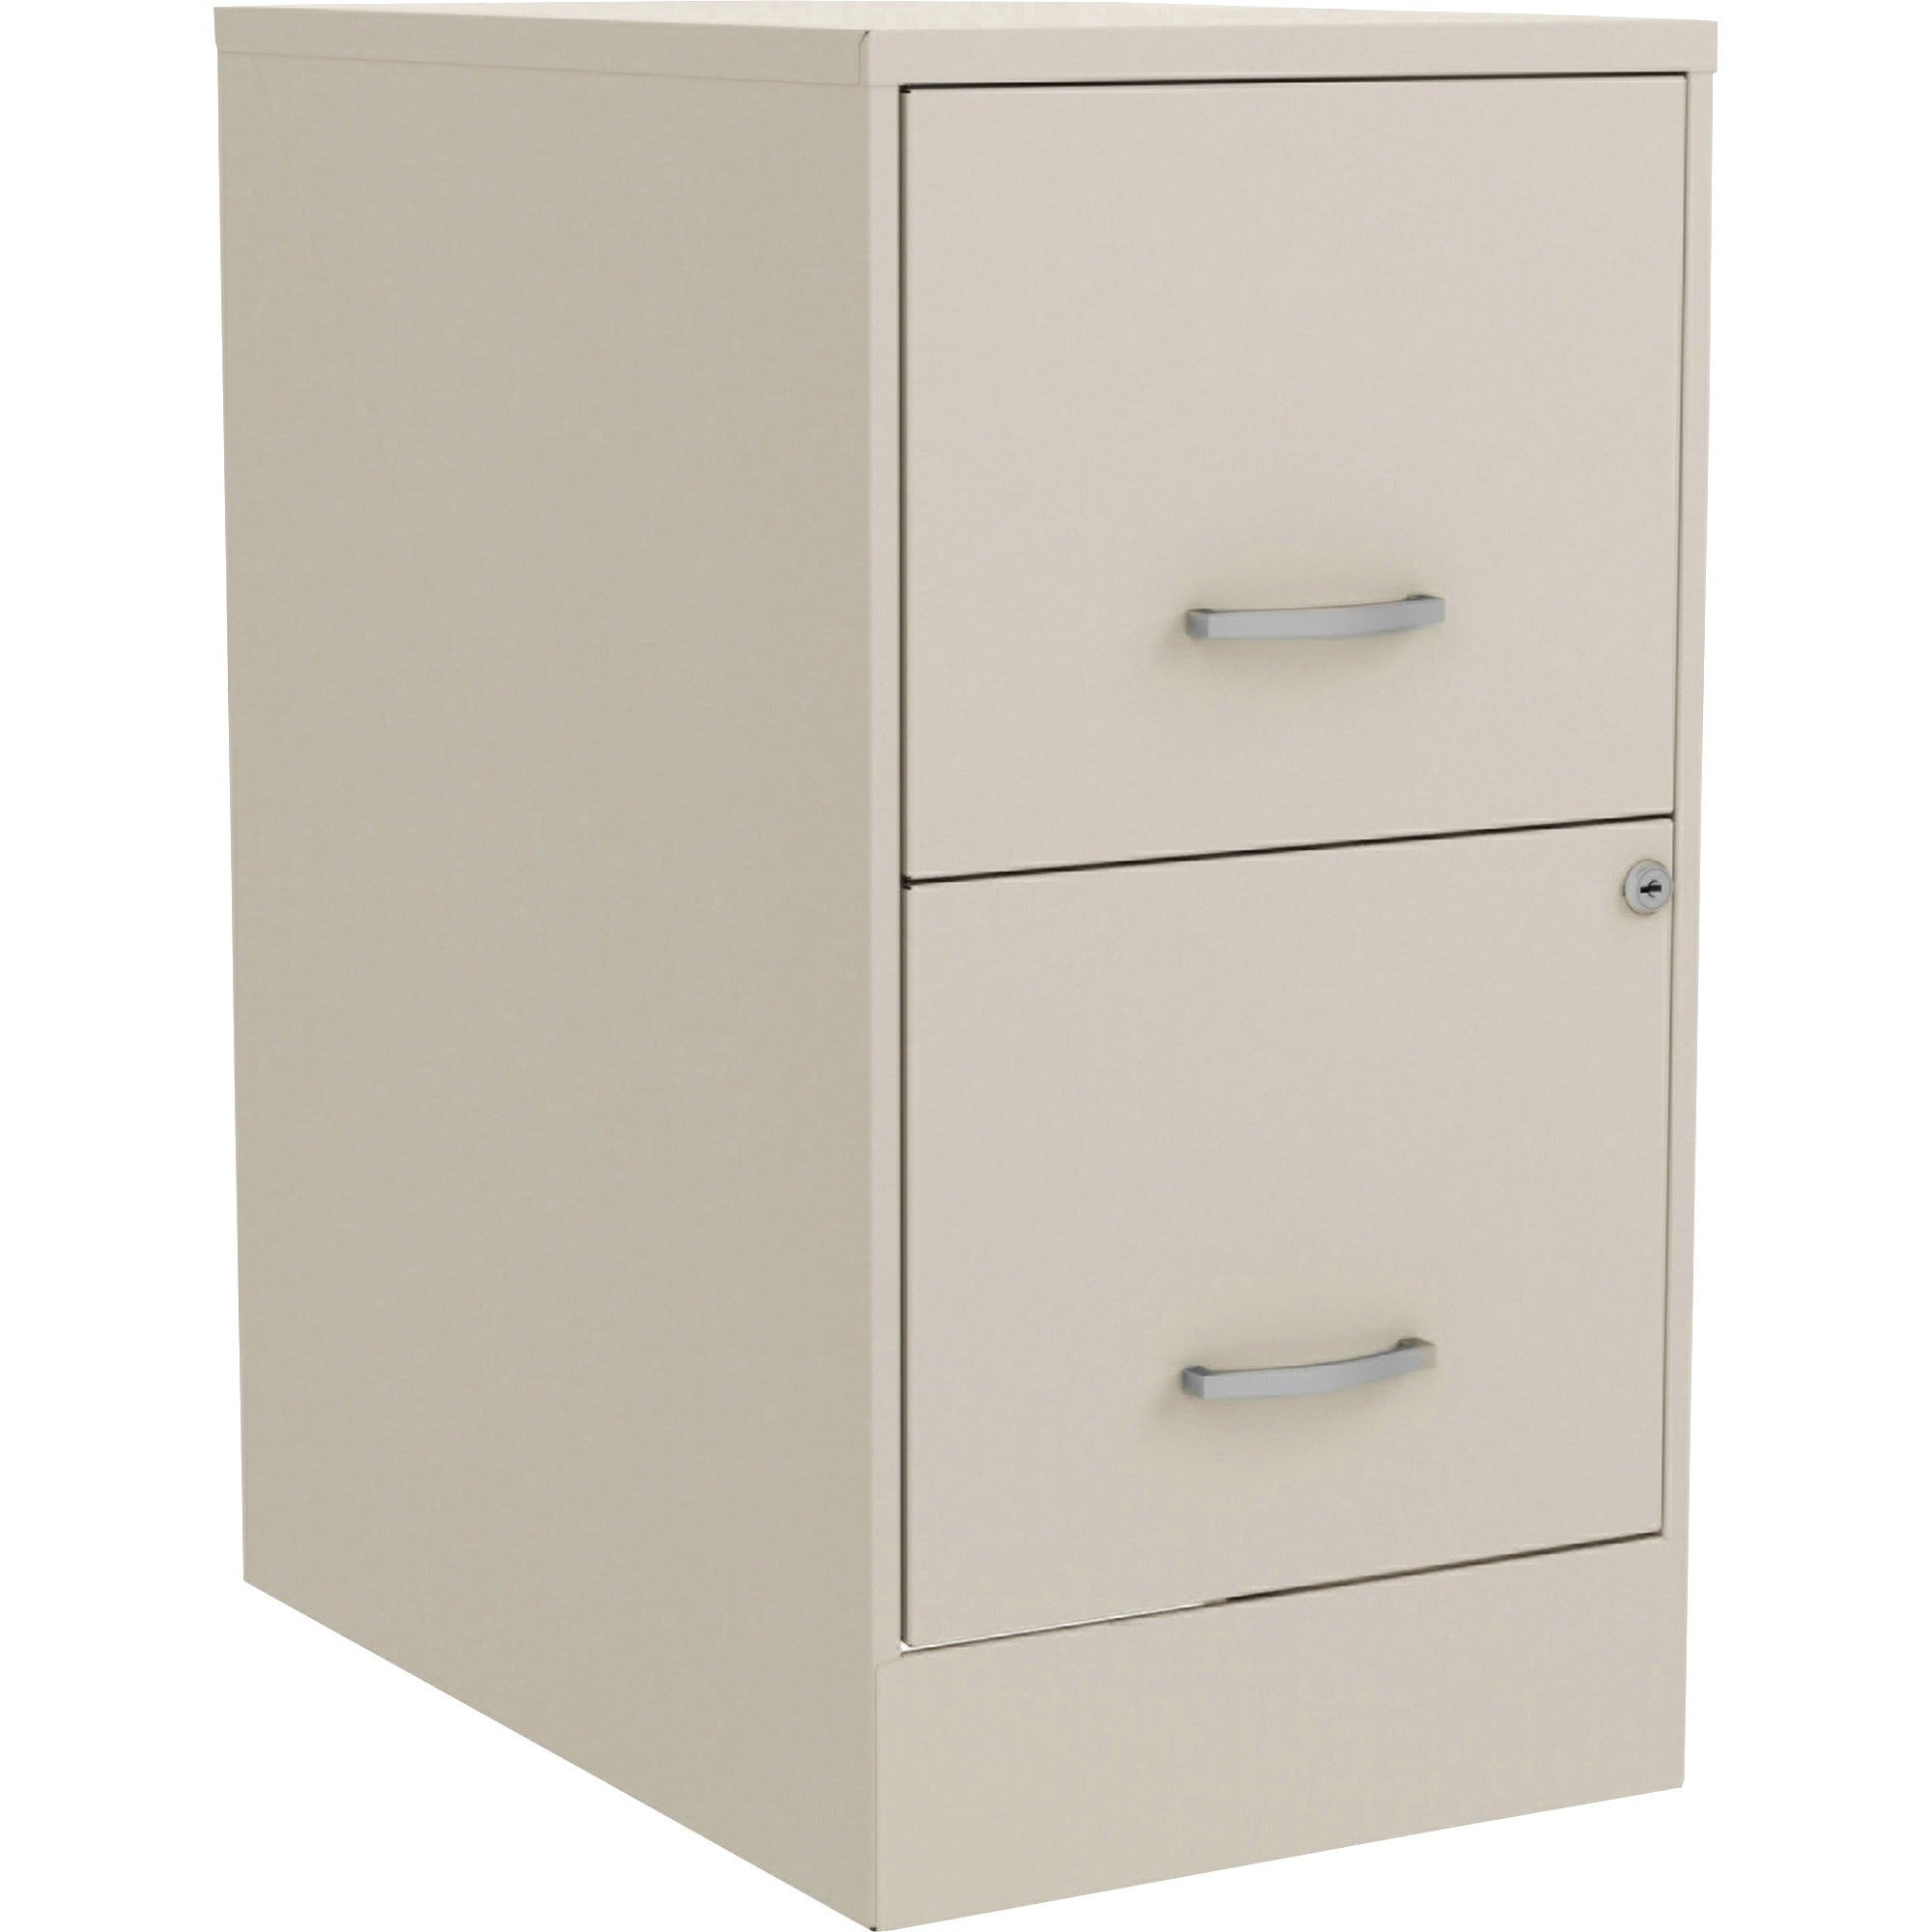 nusparc-file-cabinet-142-x-22-x-266-2-x-drawers-for-file-letter-mobility-locking-drawer-glide-suspension-3-4-drawer-extension-cam-lock-nonporous-surface-stone-steel-painted-steel-recycled_nprvf222aase - 1